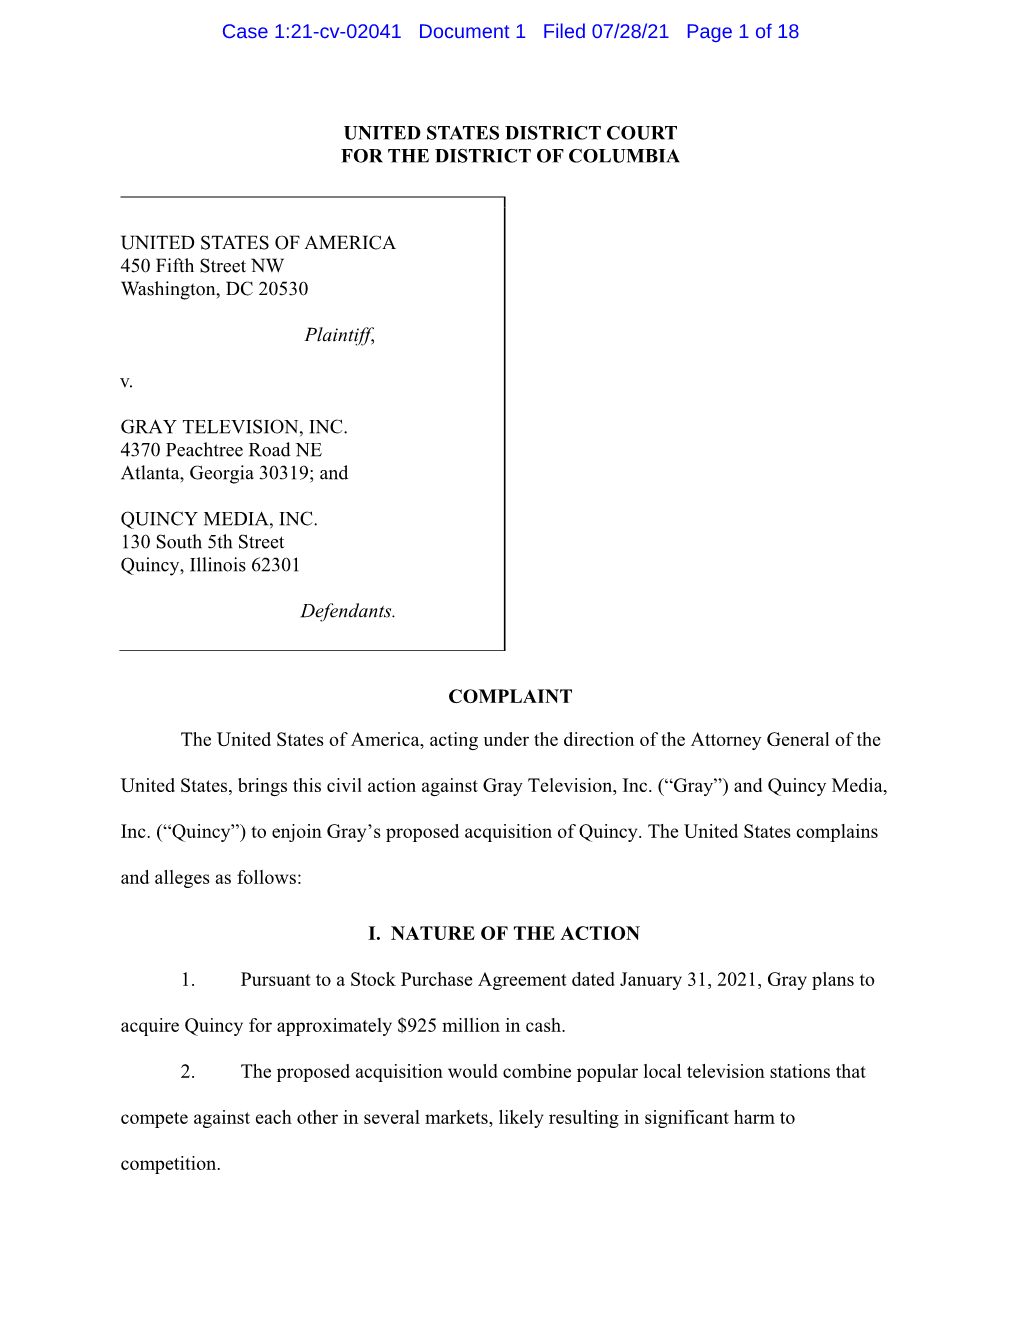 Complaint: U.S. V. Gray Television, Inc. and Quincy Media, Inc